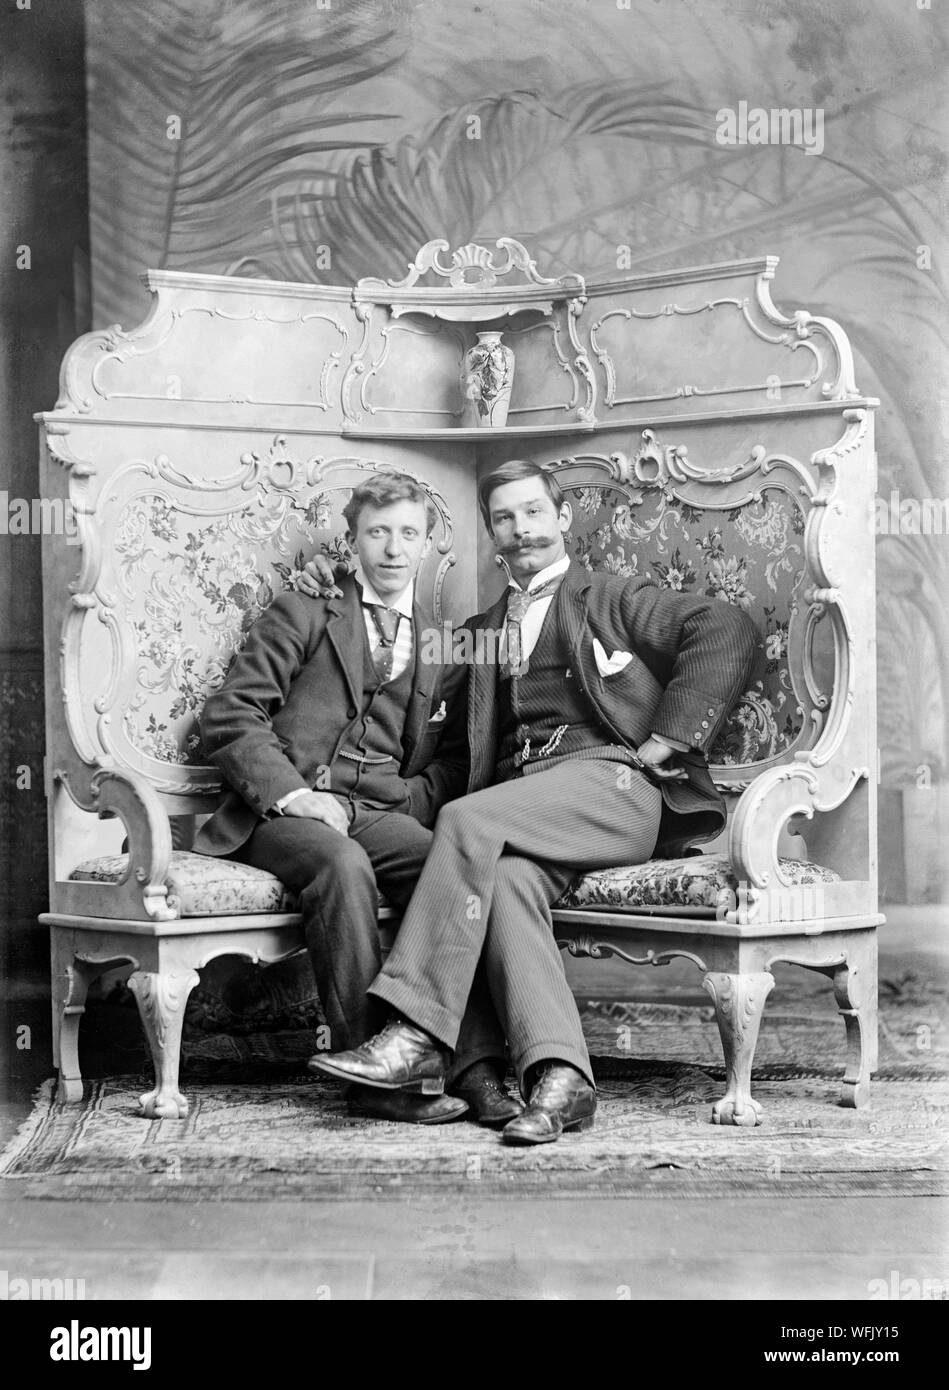 A vintage late Victorian or early Edwardian black and white photograph showing two men, seated, posing in a photographic studio. One man has a very large moustache. The pose is very formal, but also quite relaxed. Stock Photo